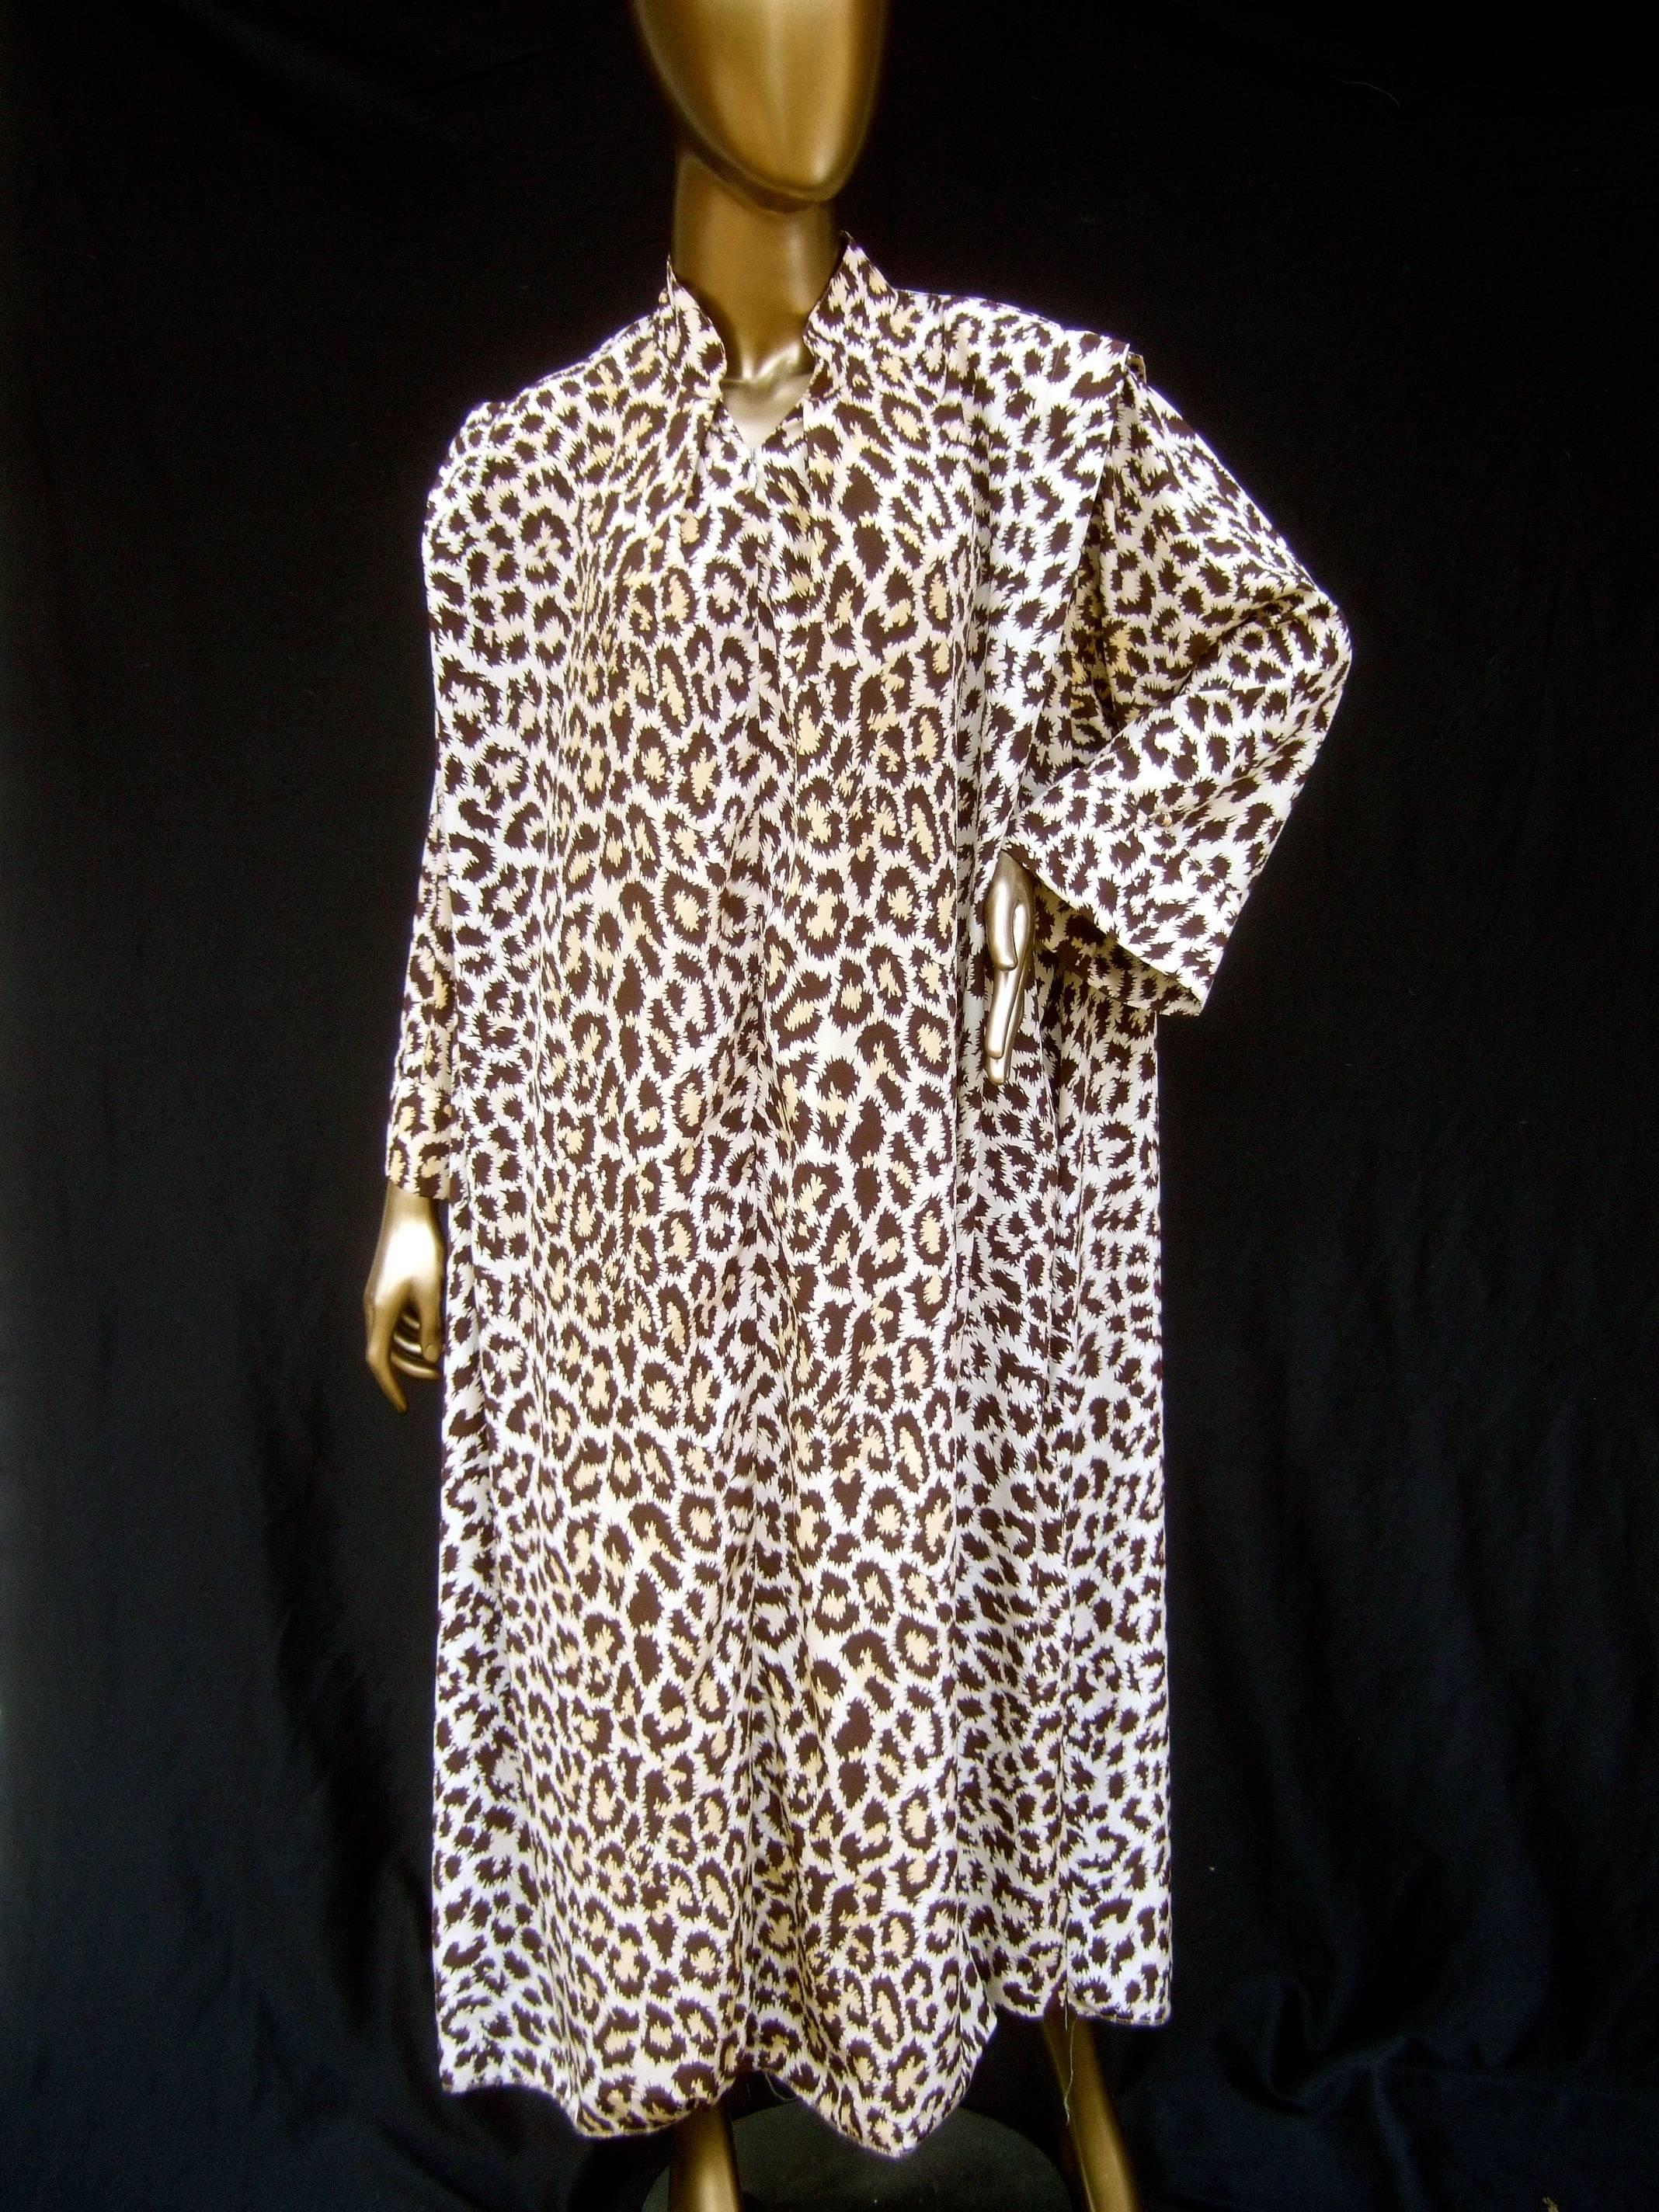 Saks Fifth Avenue Exotic animal print lounge gown for Mollie Parnis c 1970s
The stylish loose polyester animal print lounge gown is light and breezy 
The loose silhouette crosses over several sizes 

Partially zippers down the front neckline. The